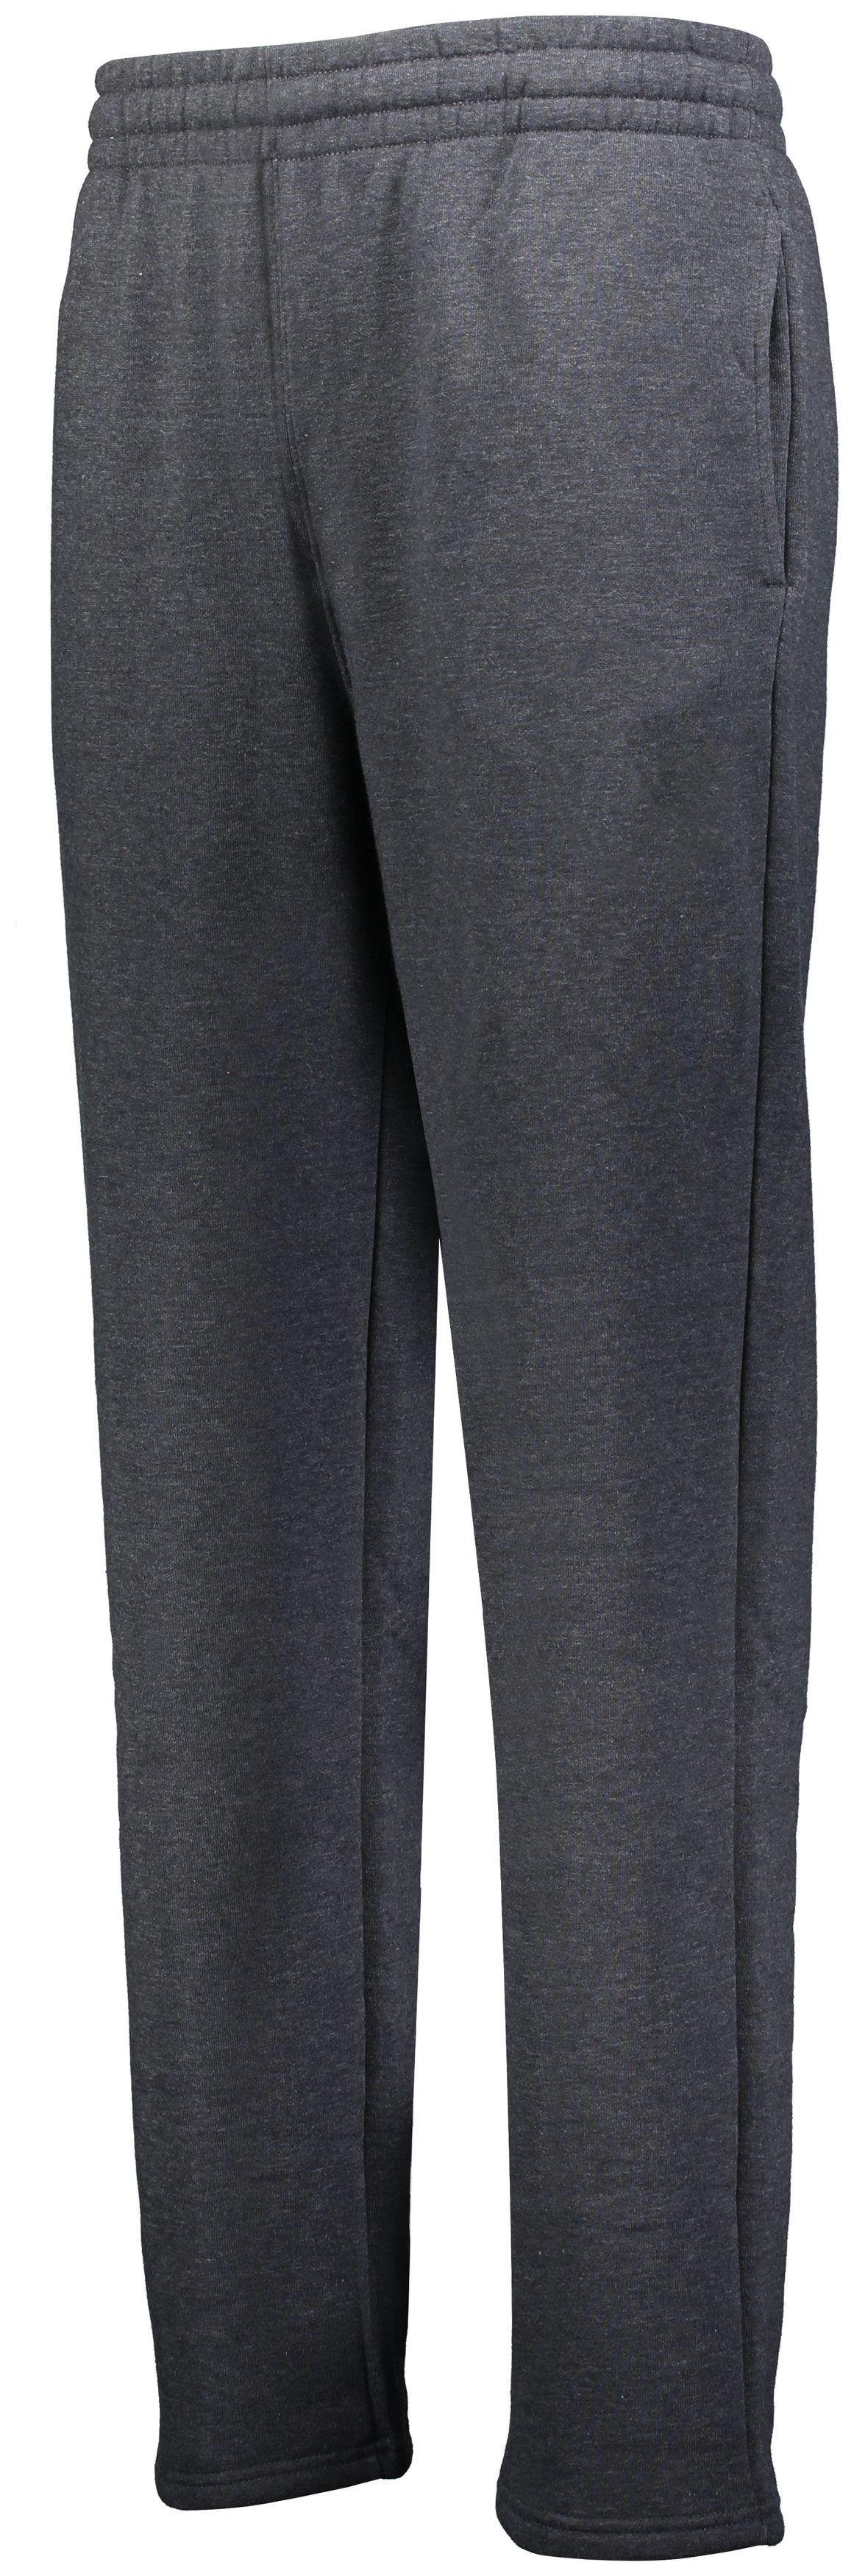 Russell 80/20 Open Bottom Sweatpant